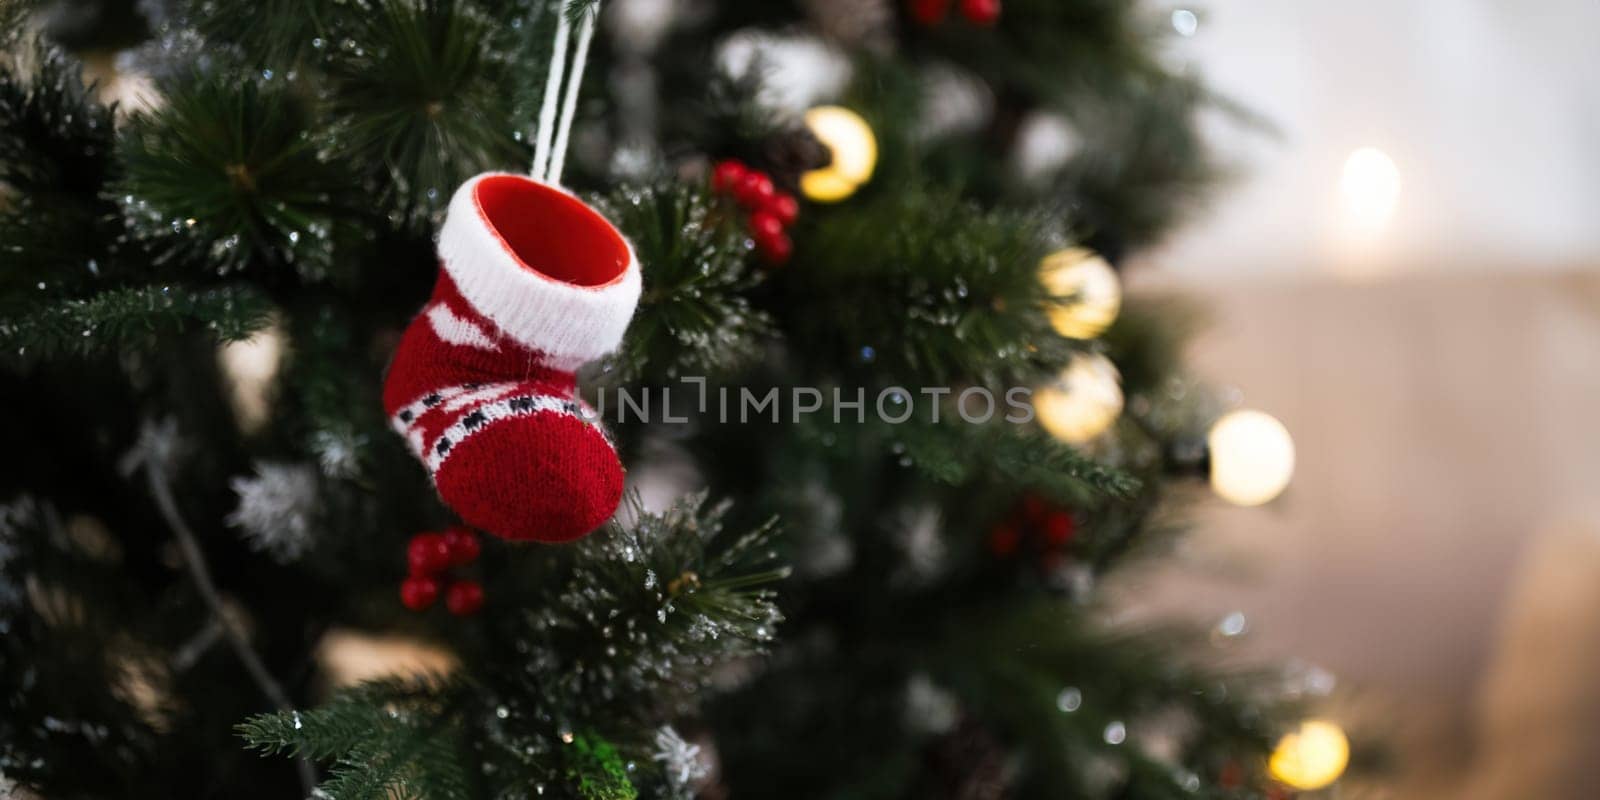 Background Christmas Tree and Stockings with Decorations Near a Fireplace with Lights by nateemee